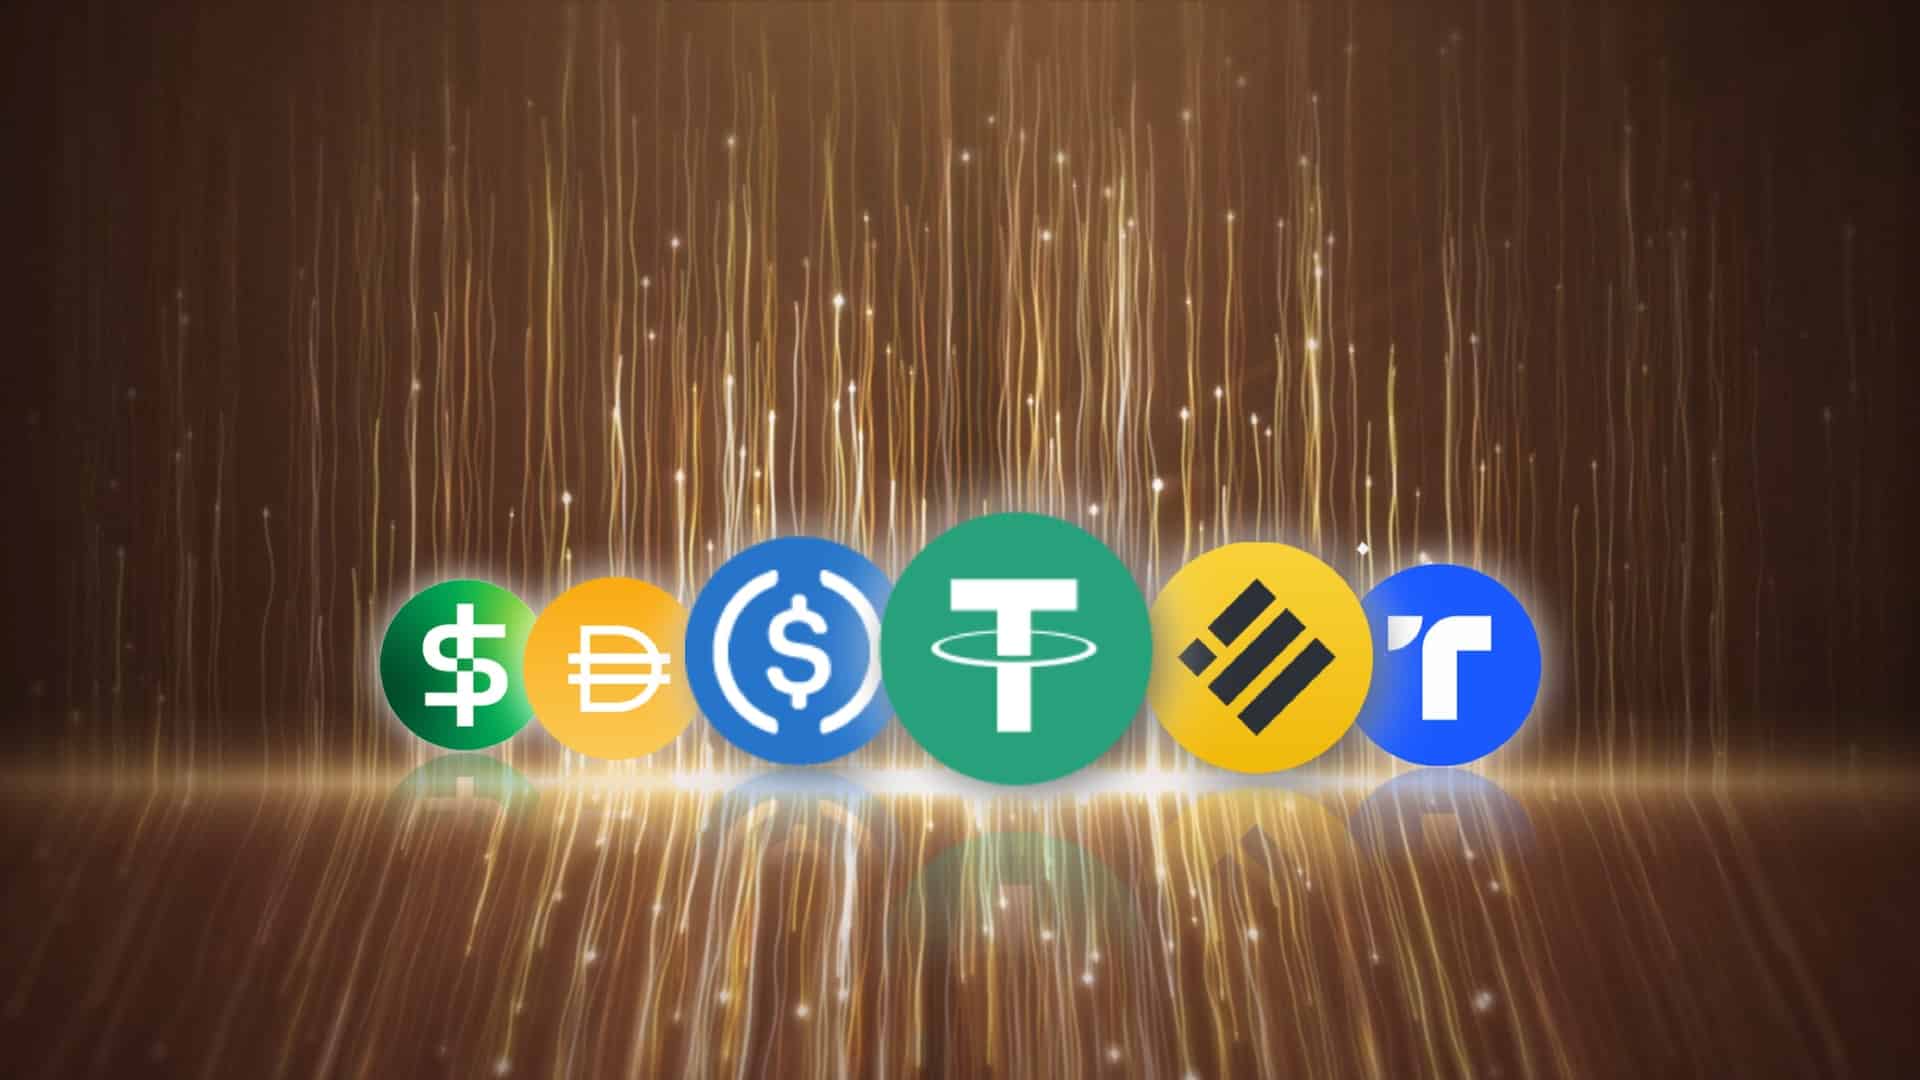 How to earn interest on Stablecoins - 5 ways to do it - The Economic Times